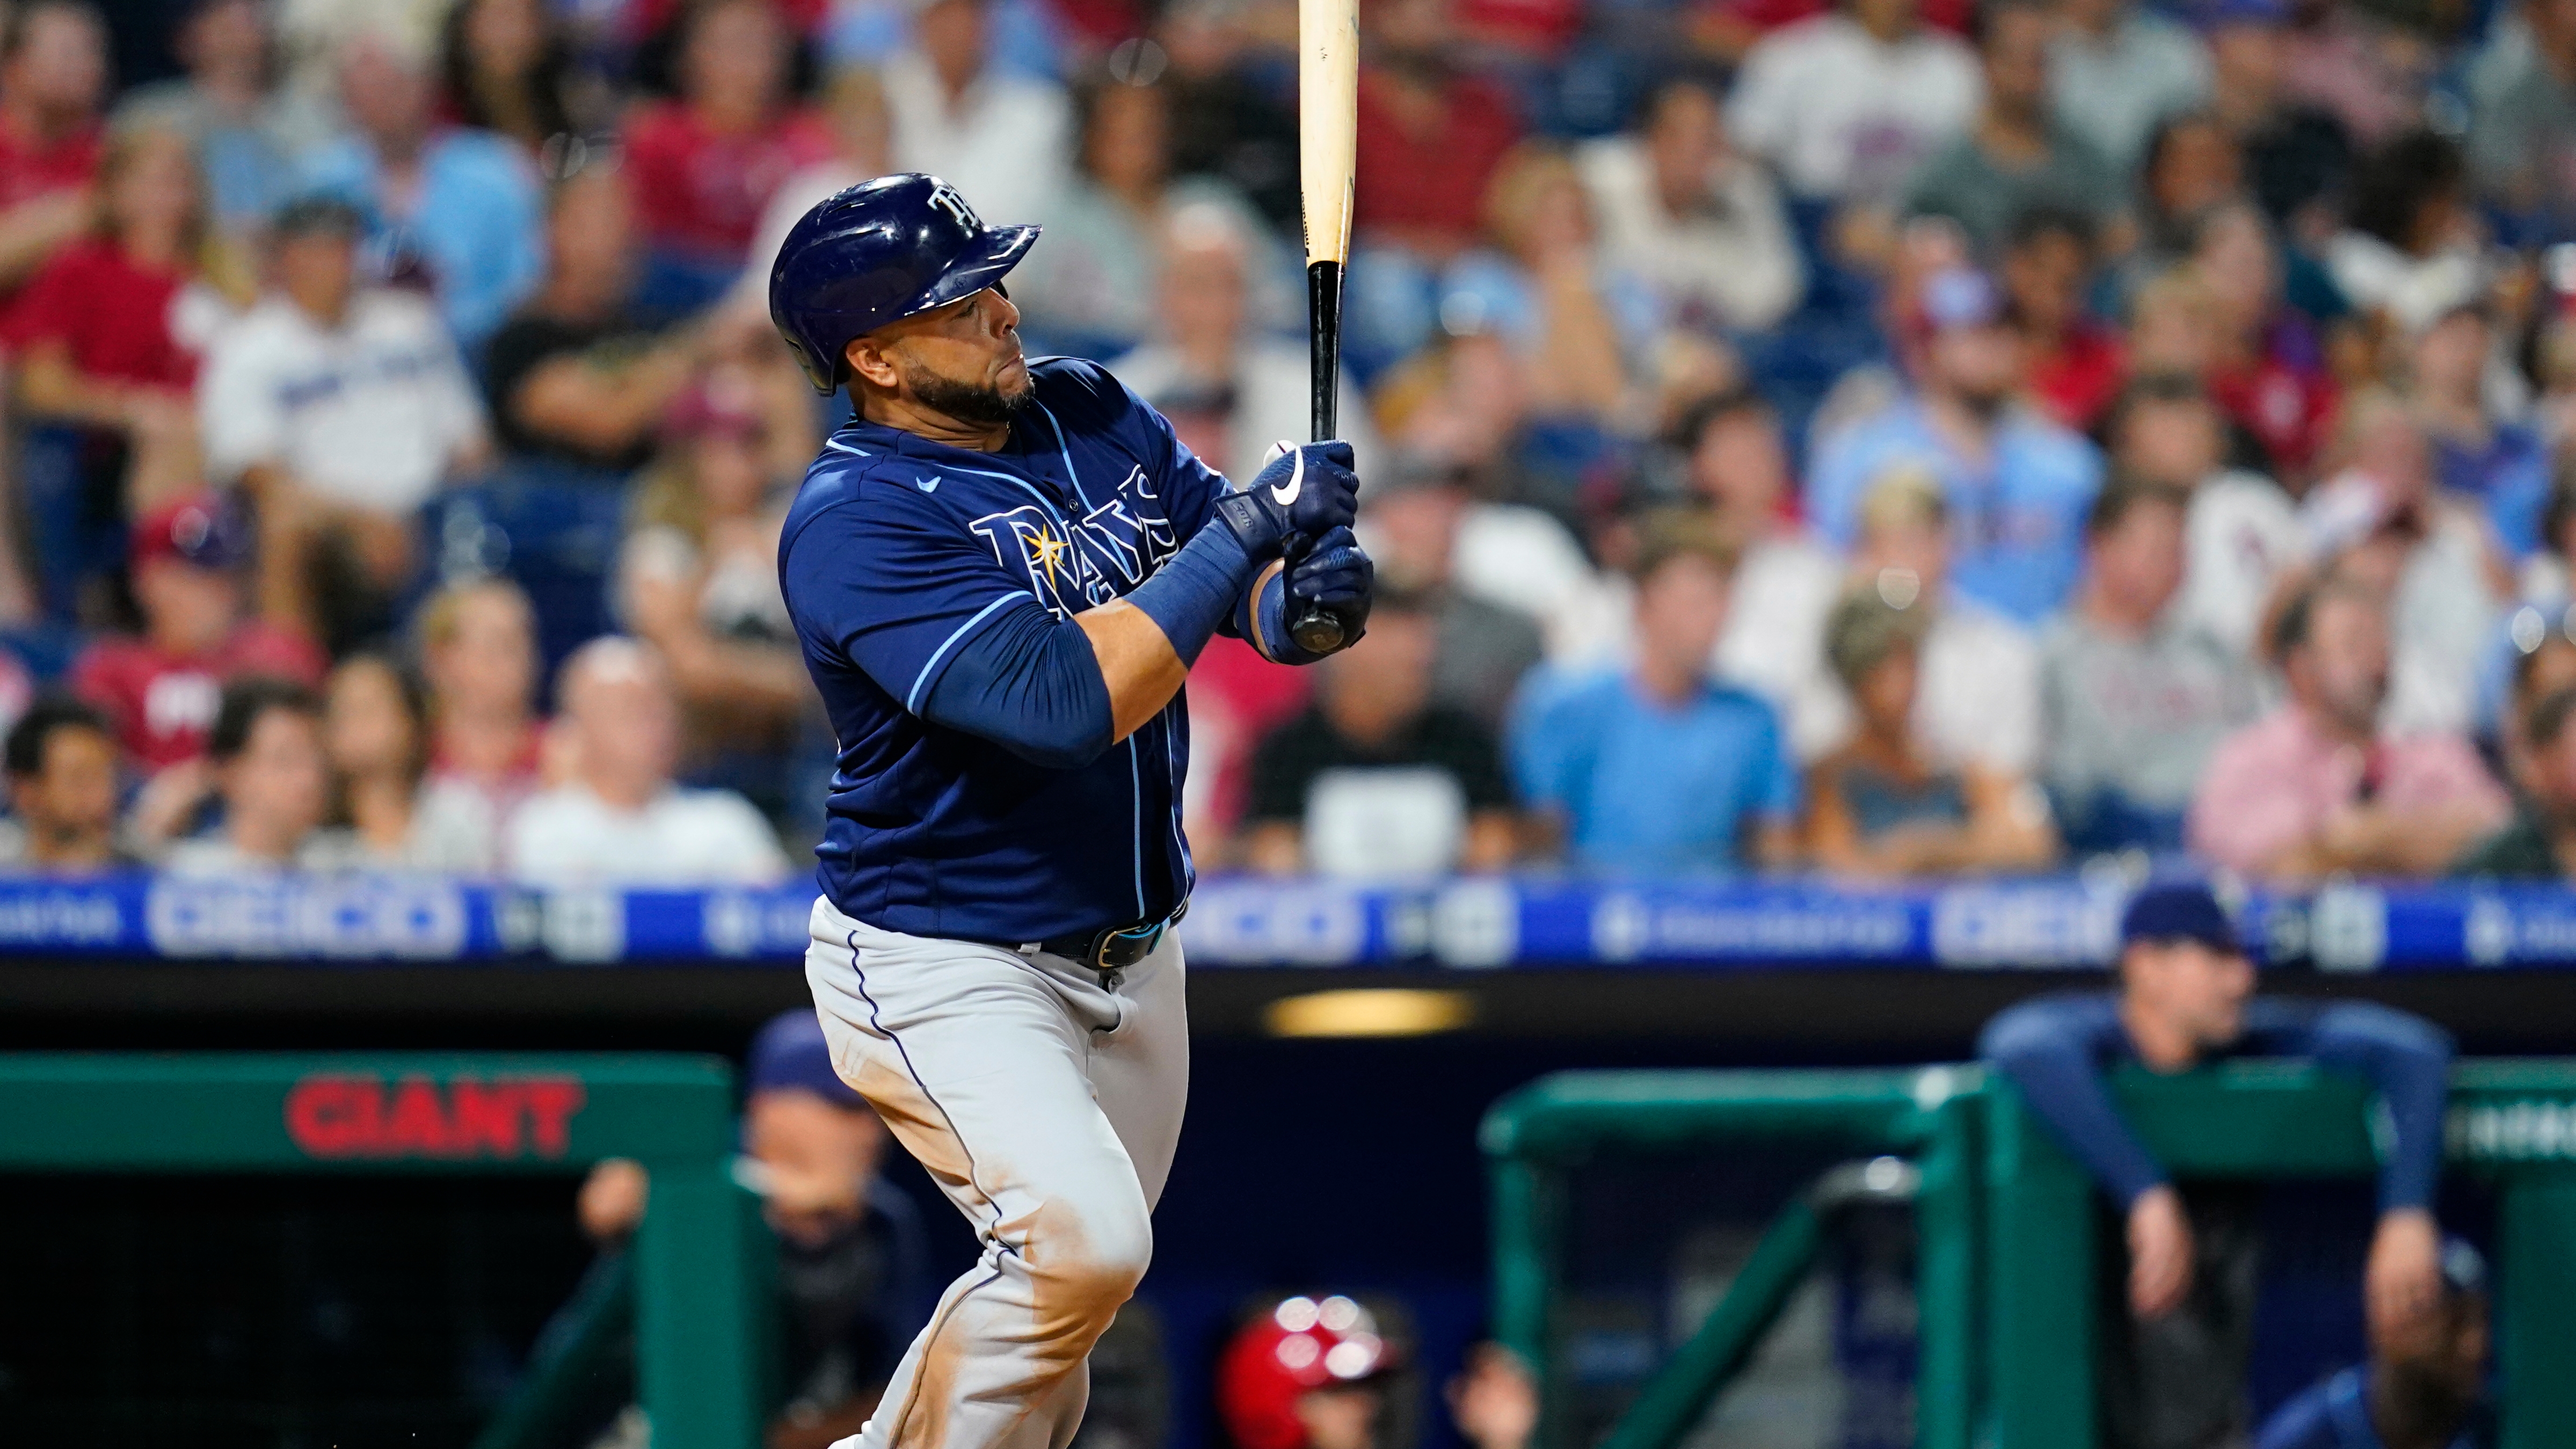 That new first baseman, Nelson Cruz, leads Rays past Phillies